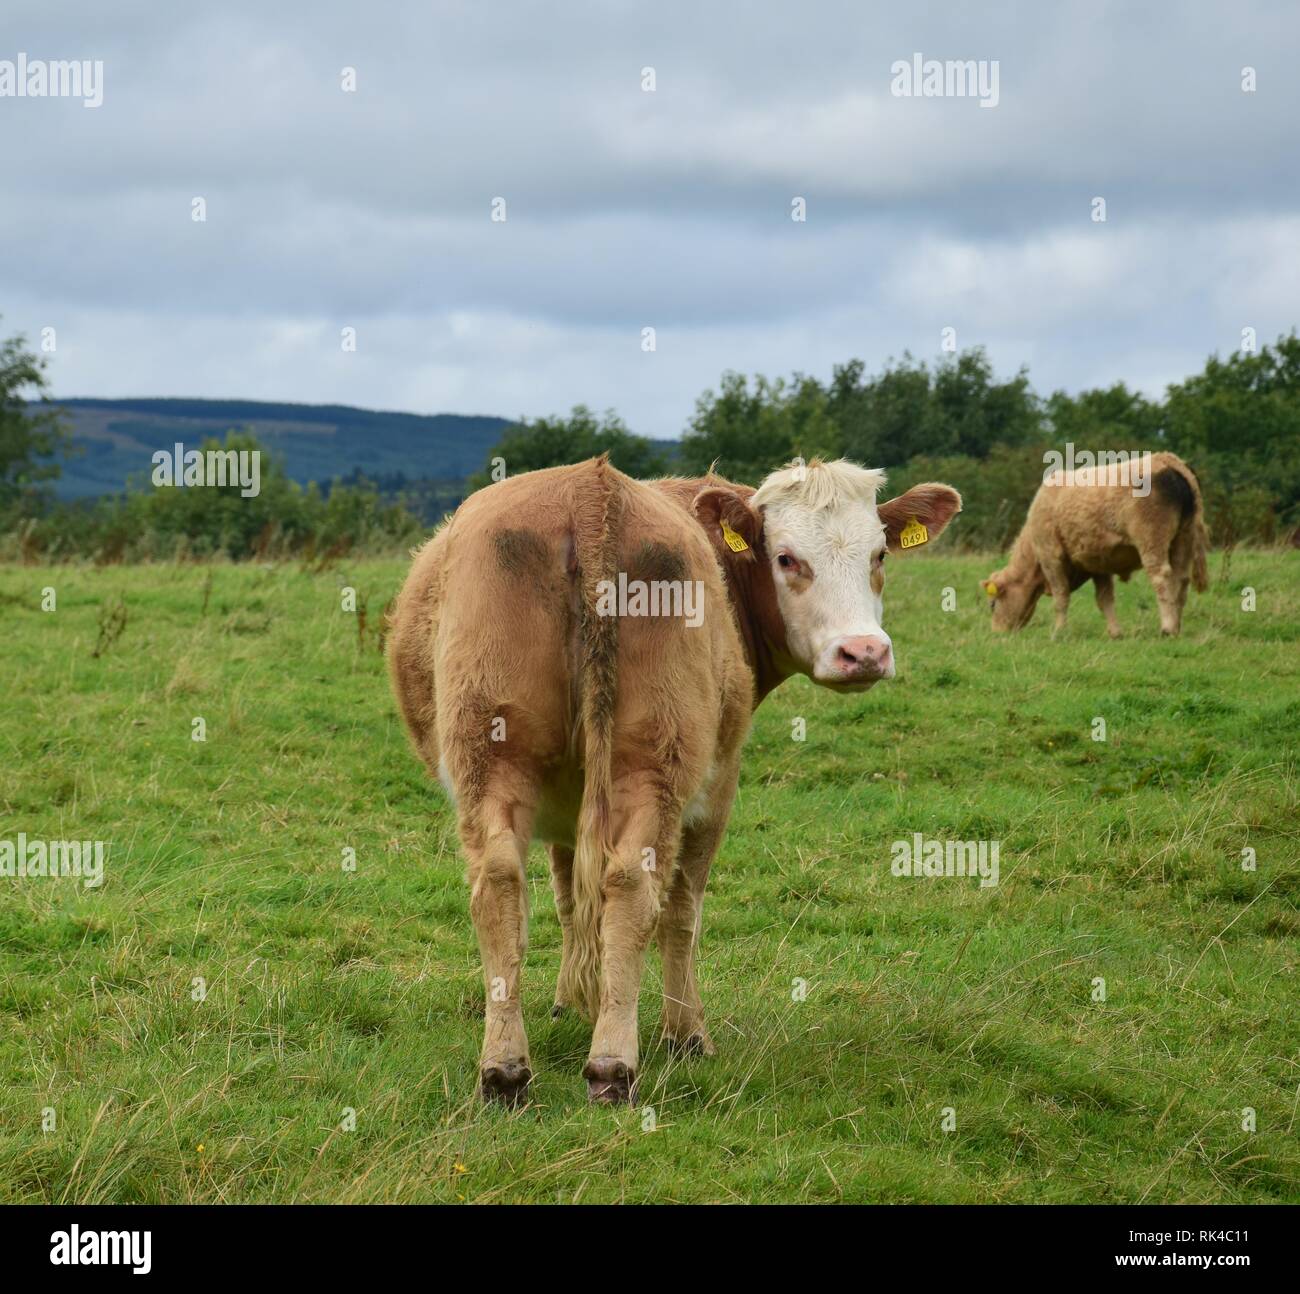 A cattle on Holy Island in Lough Derg, Ireland, living free there in the summertime. Stock Photo